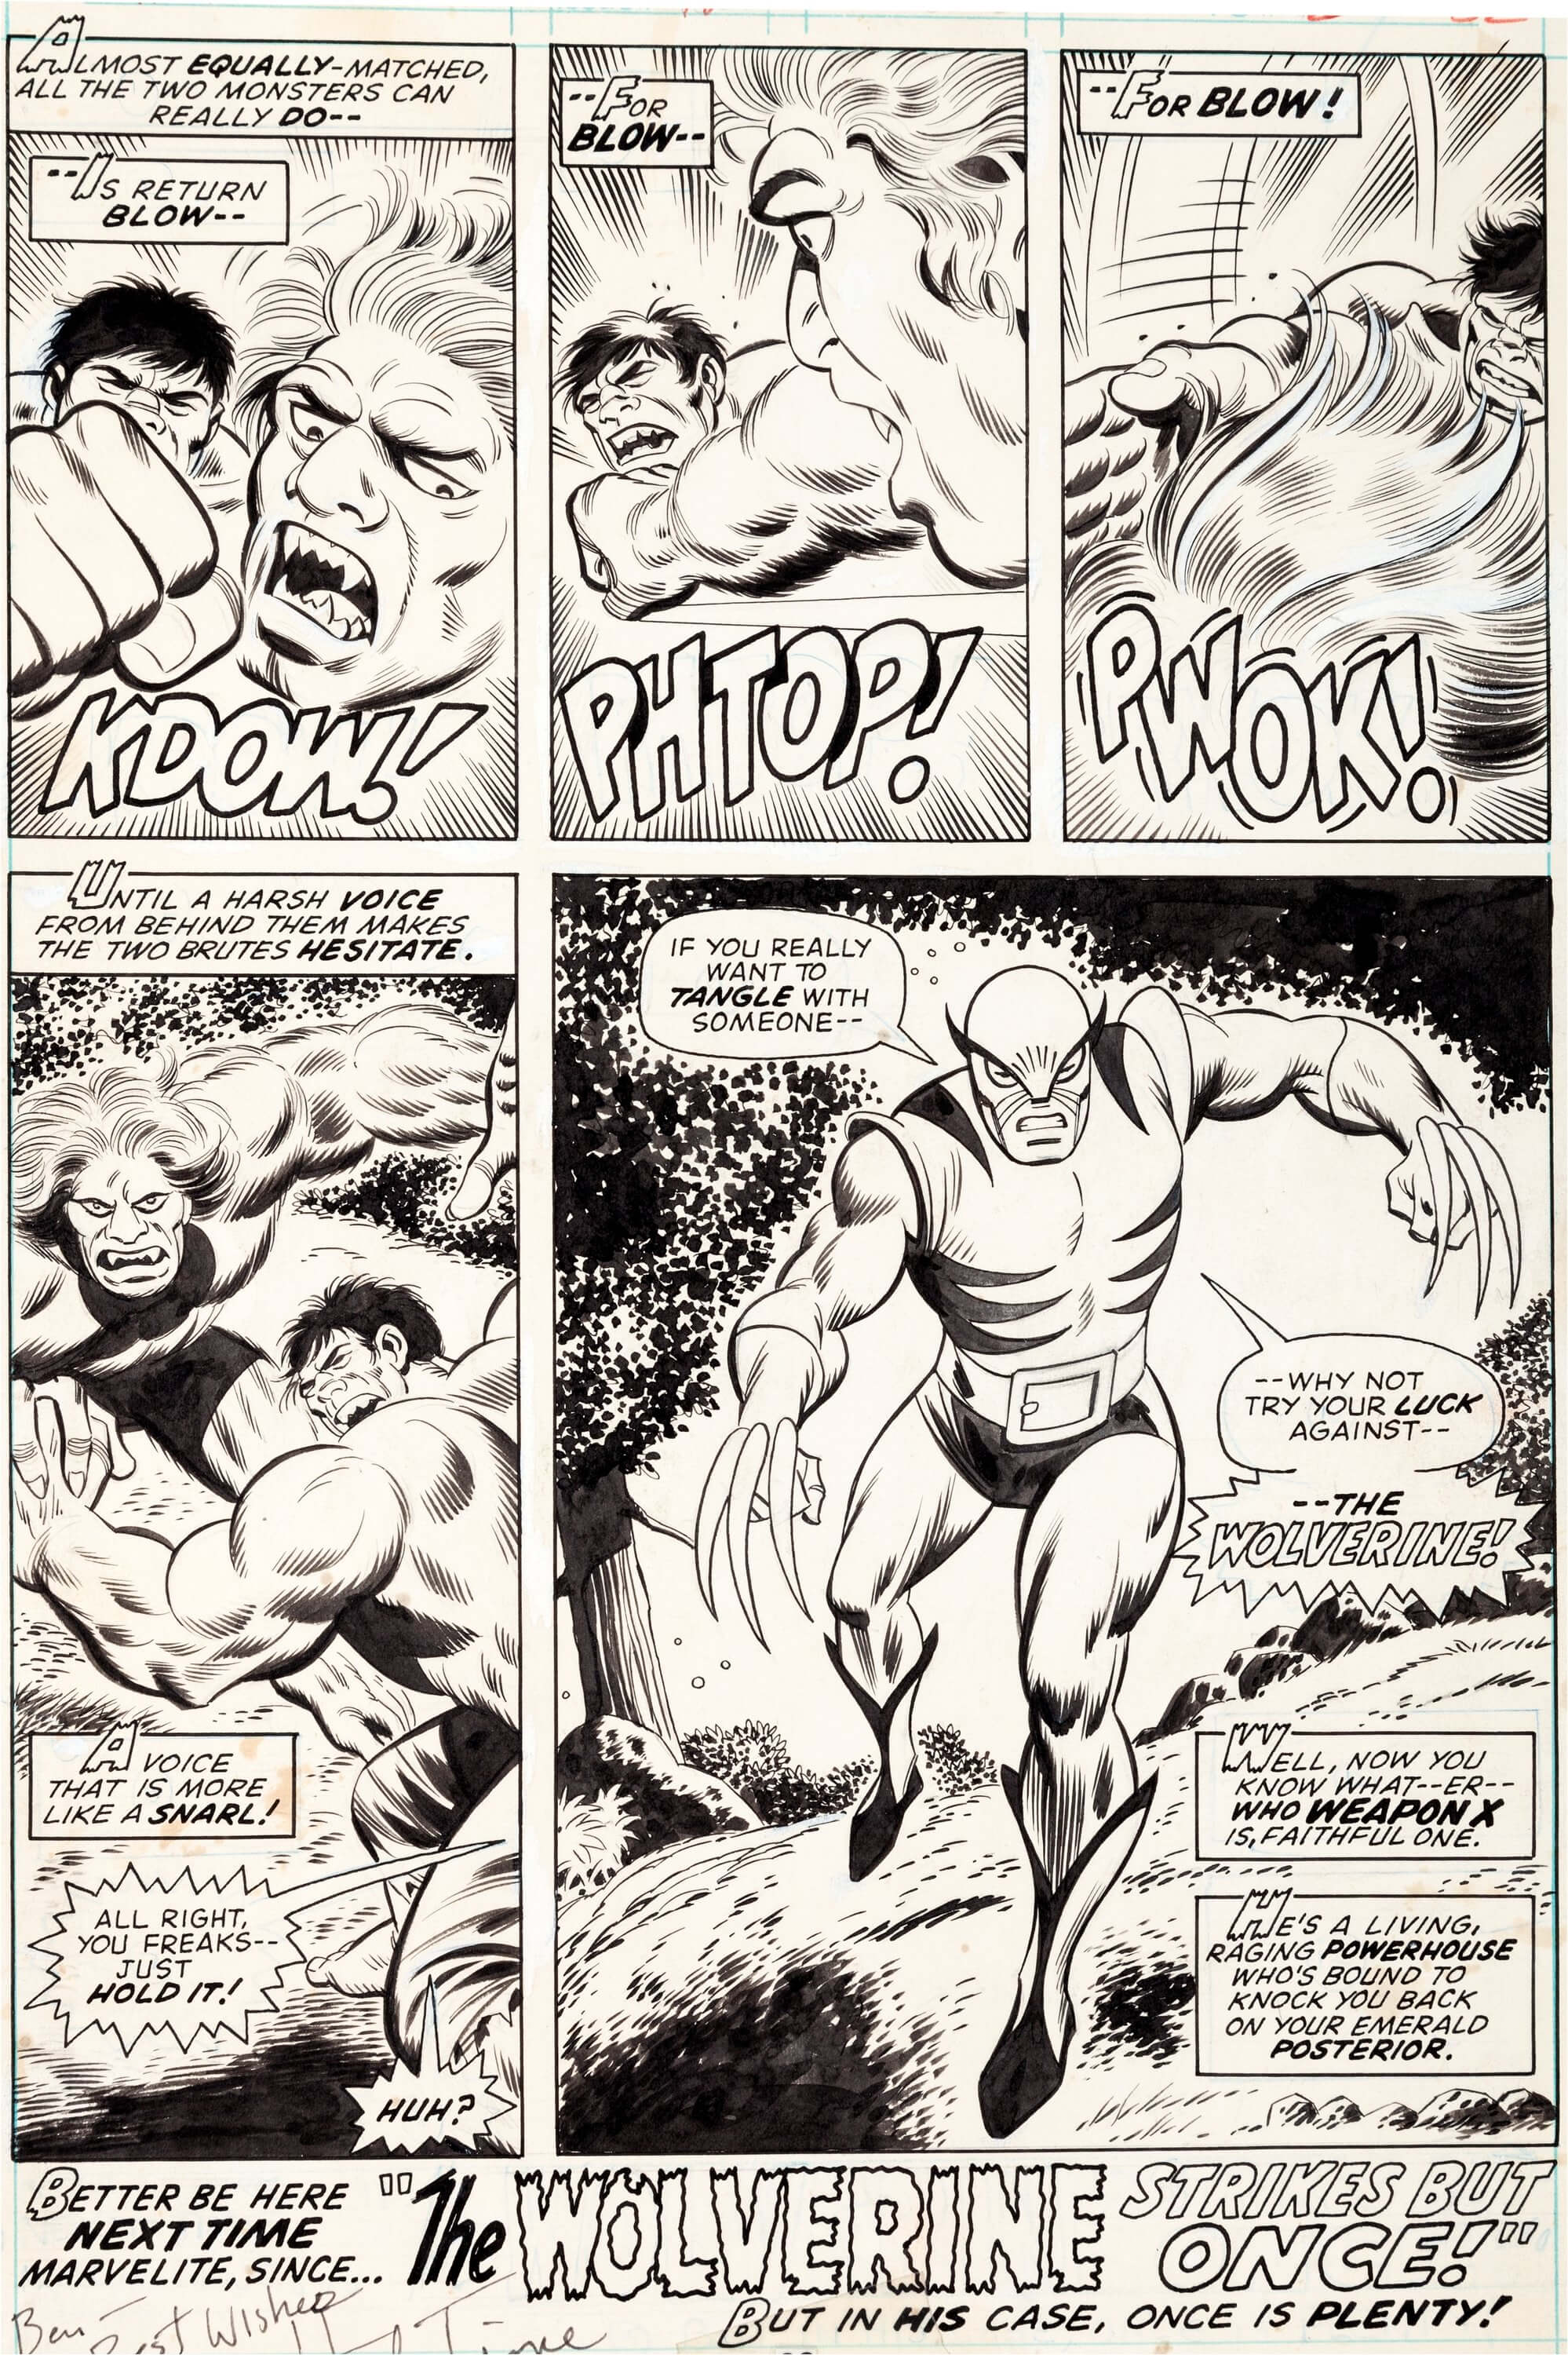 Herb Trimpe Incredible Hulk #180 Wolverine introduction page